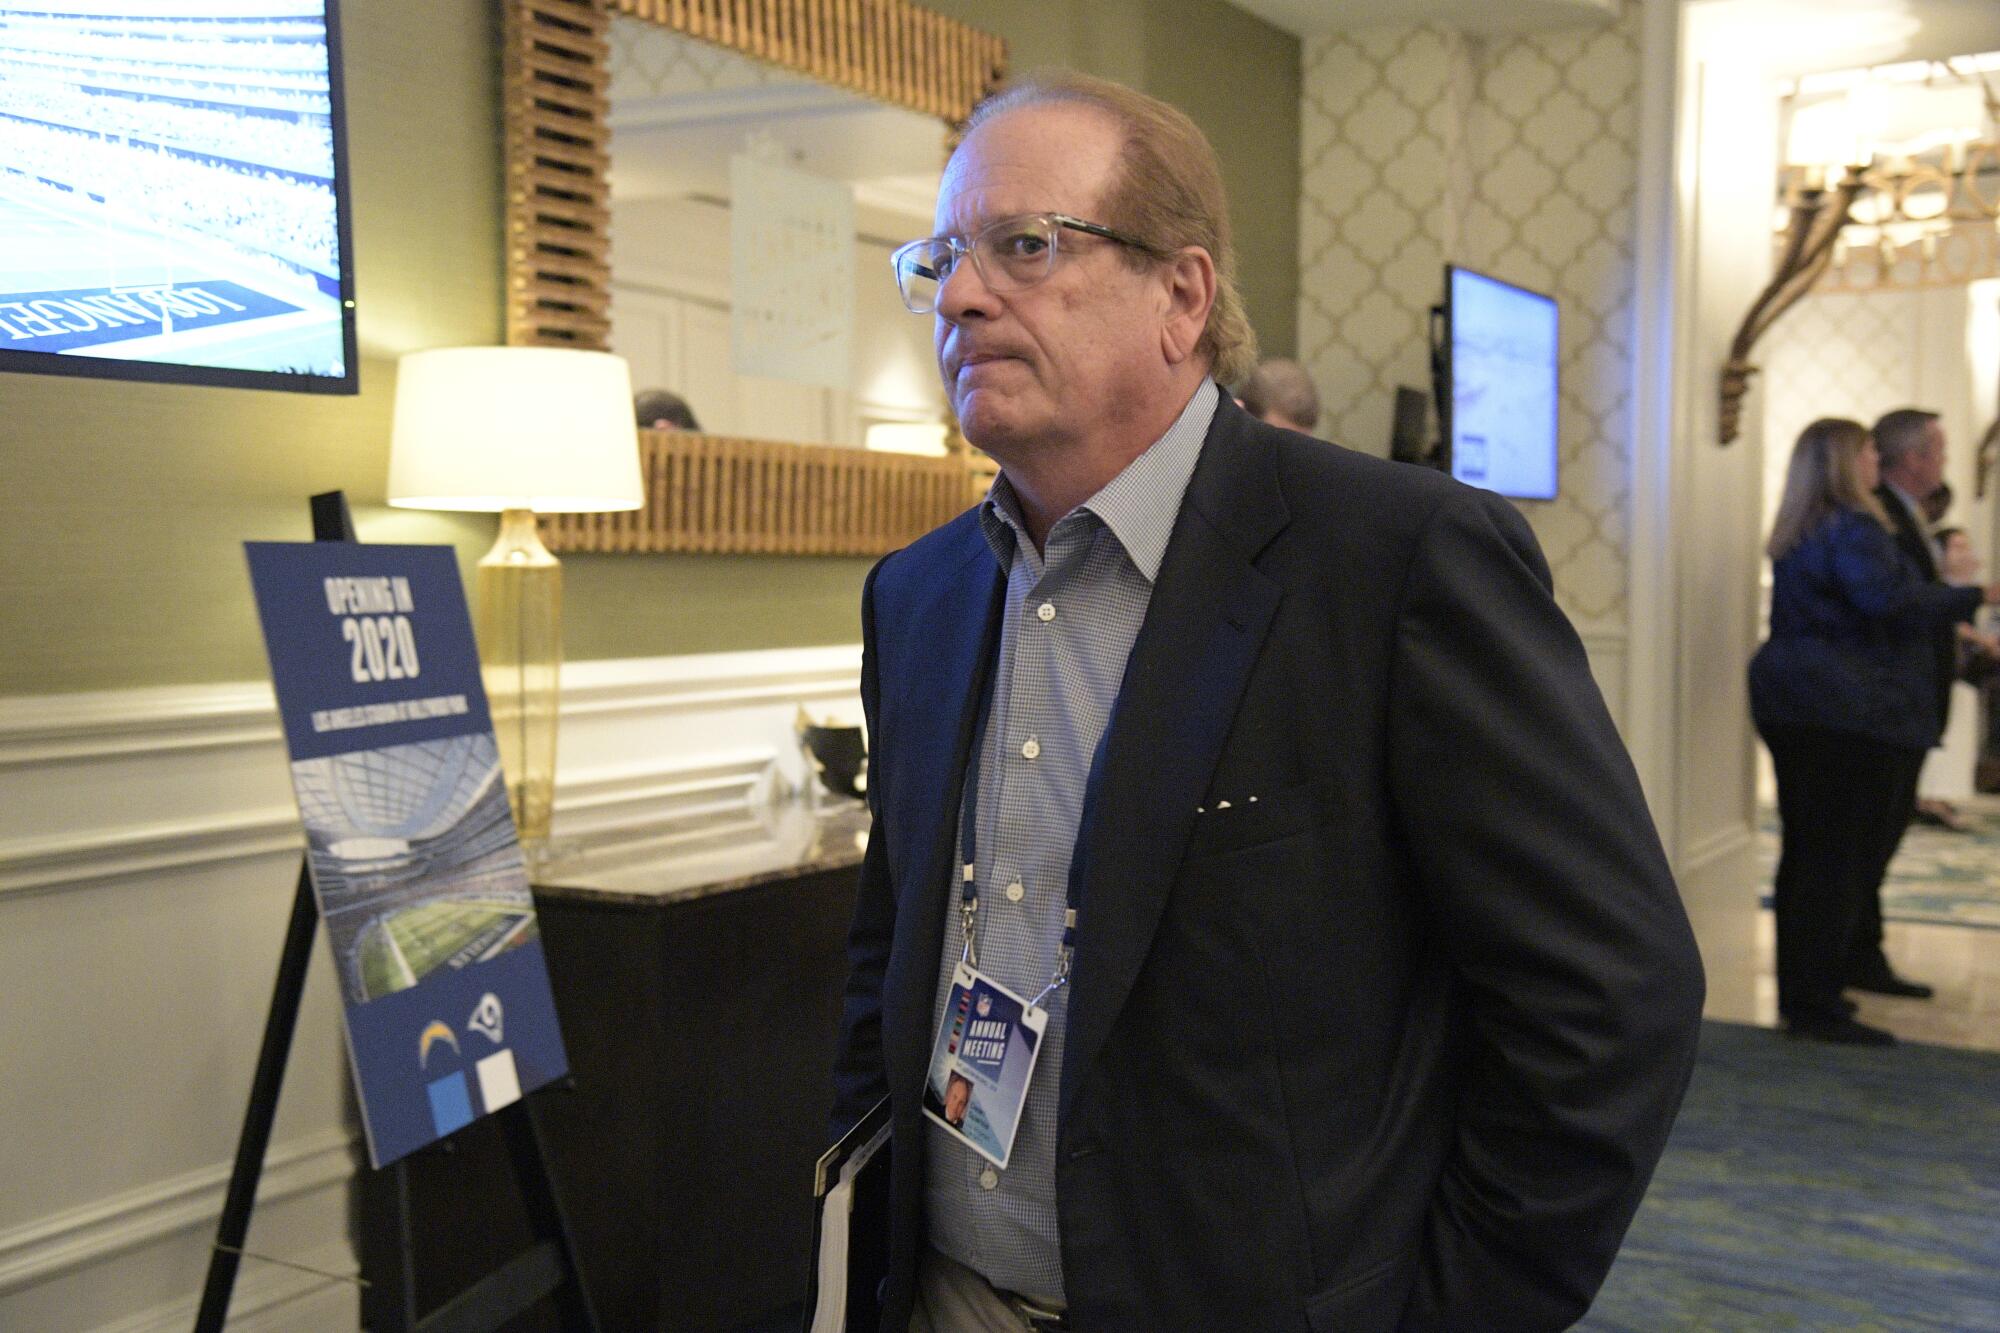 Chargers owner Dean Spanos leaves a conference room during the NFL owners meetings.